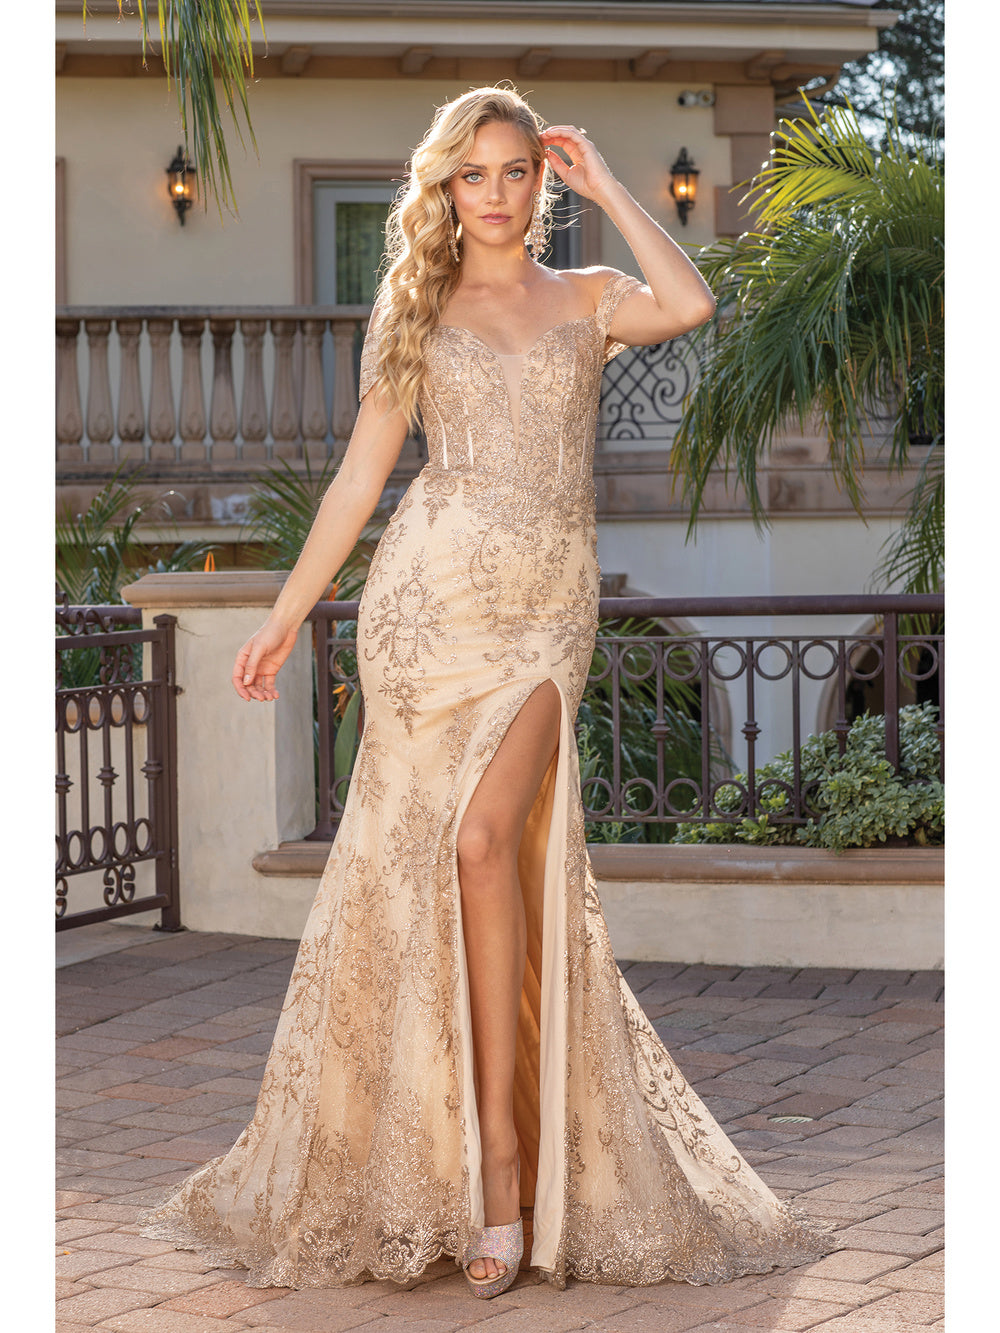 DQ 4332 - Glitter Pattern Off the Shoulder Fit & Flare Prom Gown with Sheer Boned Bodice & Leg Slit PROM GOWN Dancing Queen XS GOLD 